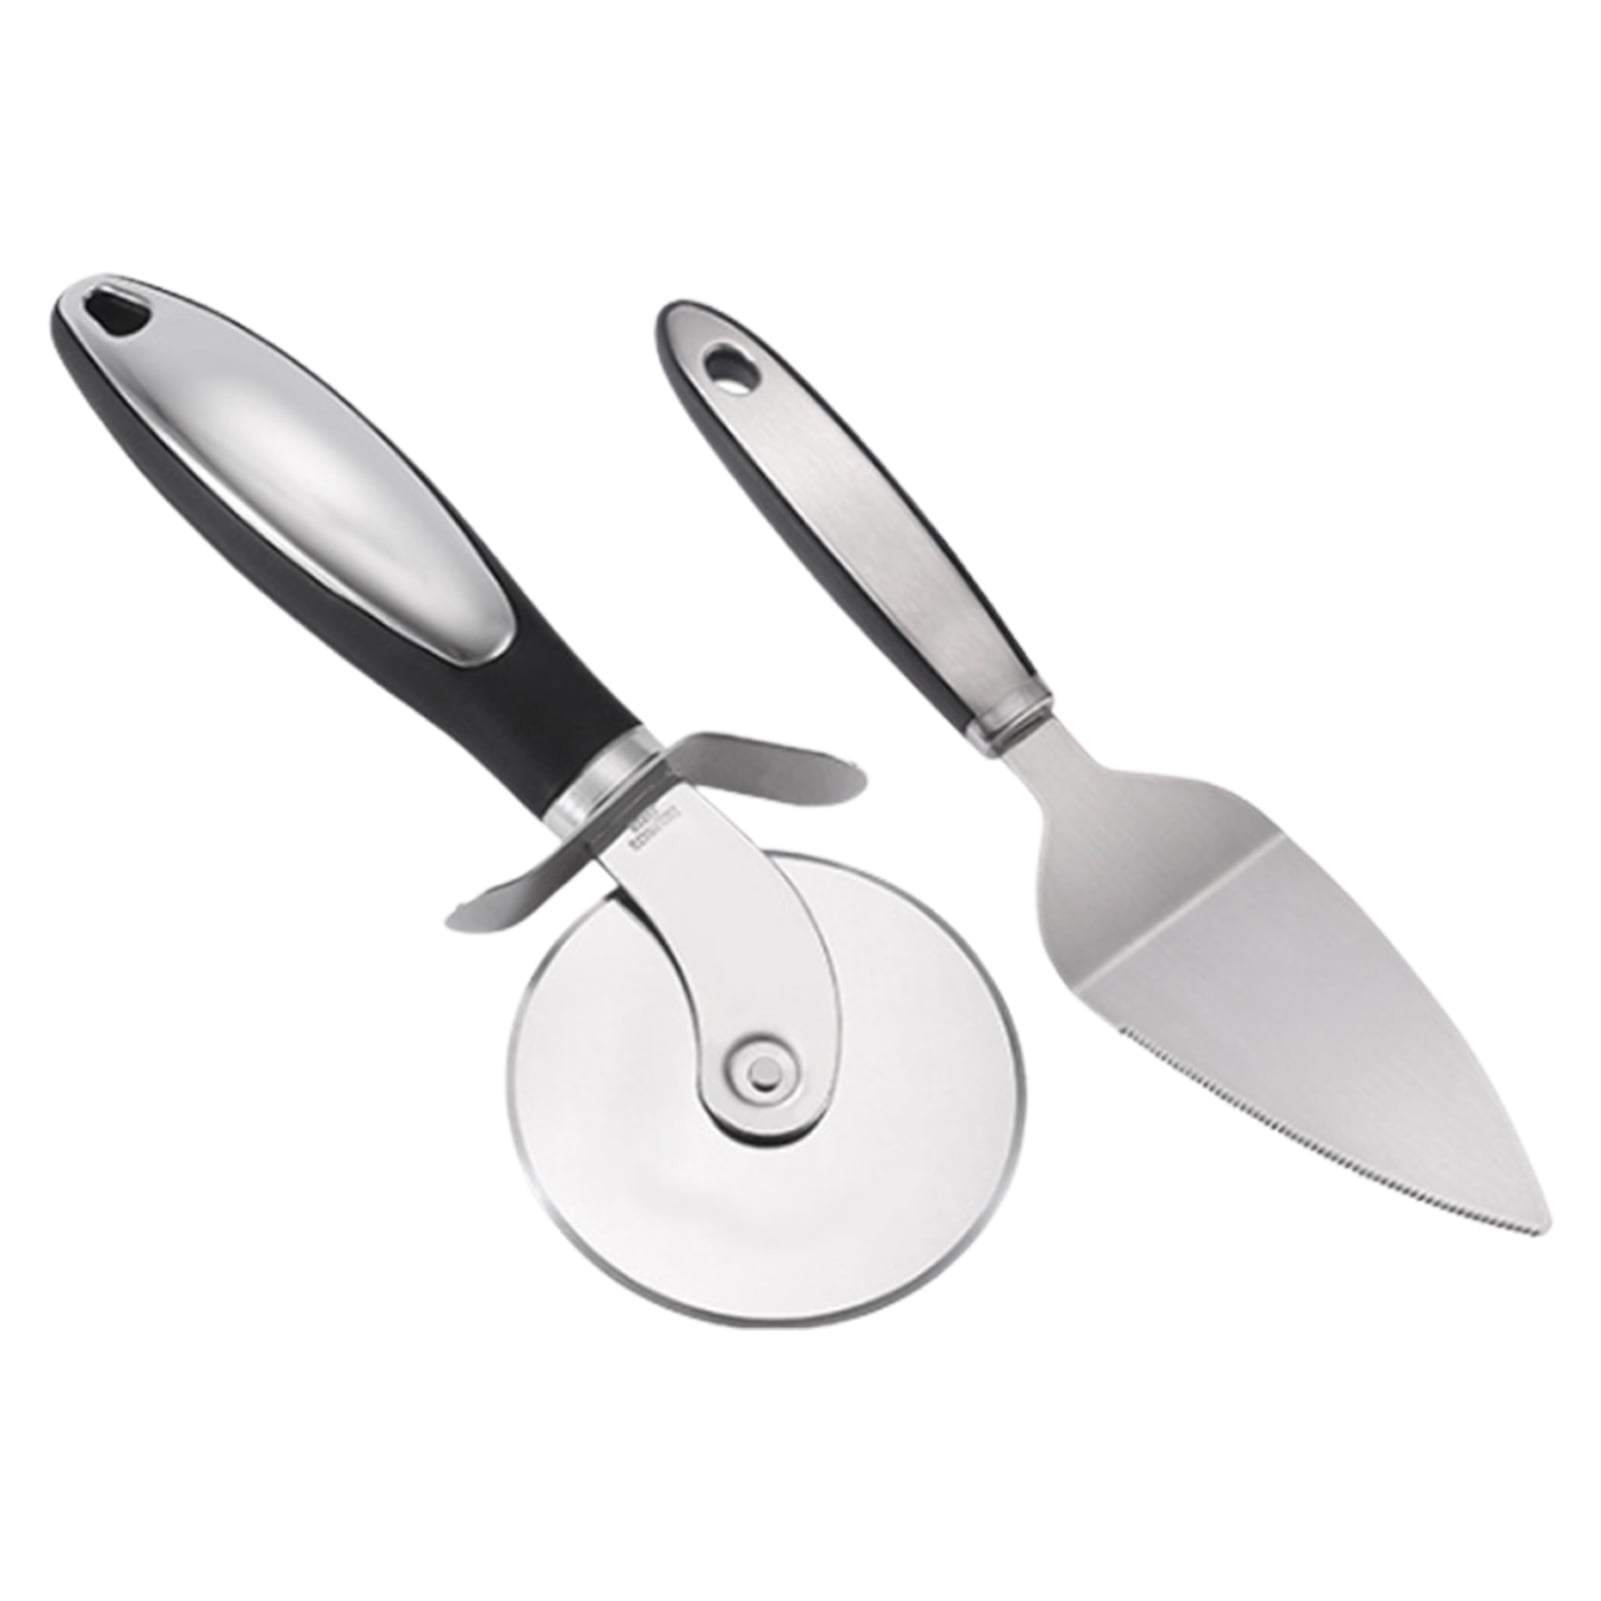 Details about   Pizza Cutter Server Professional 3 In 1 Sharp Stainless Steel Multitool NEW 